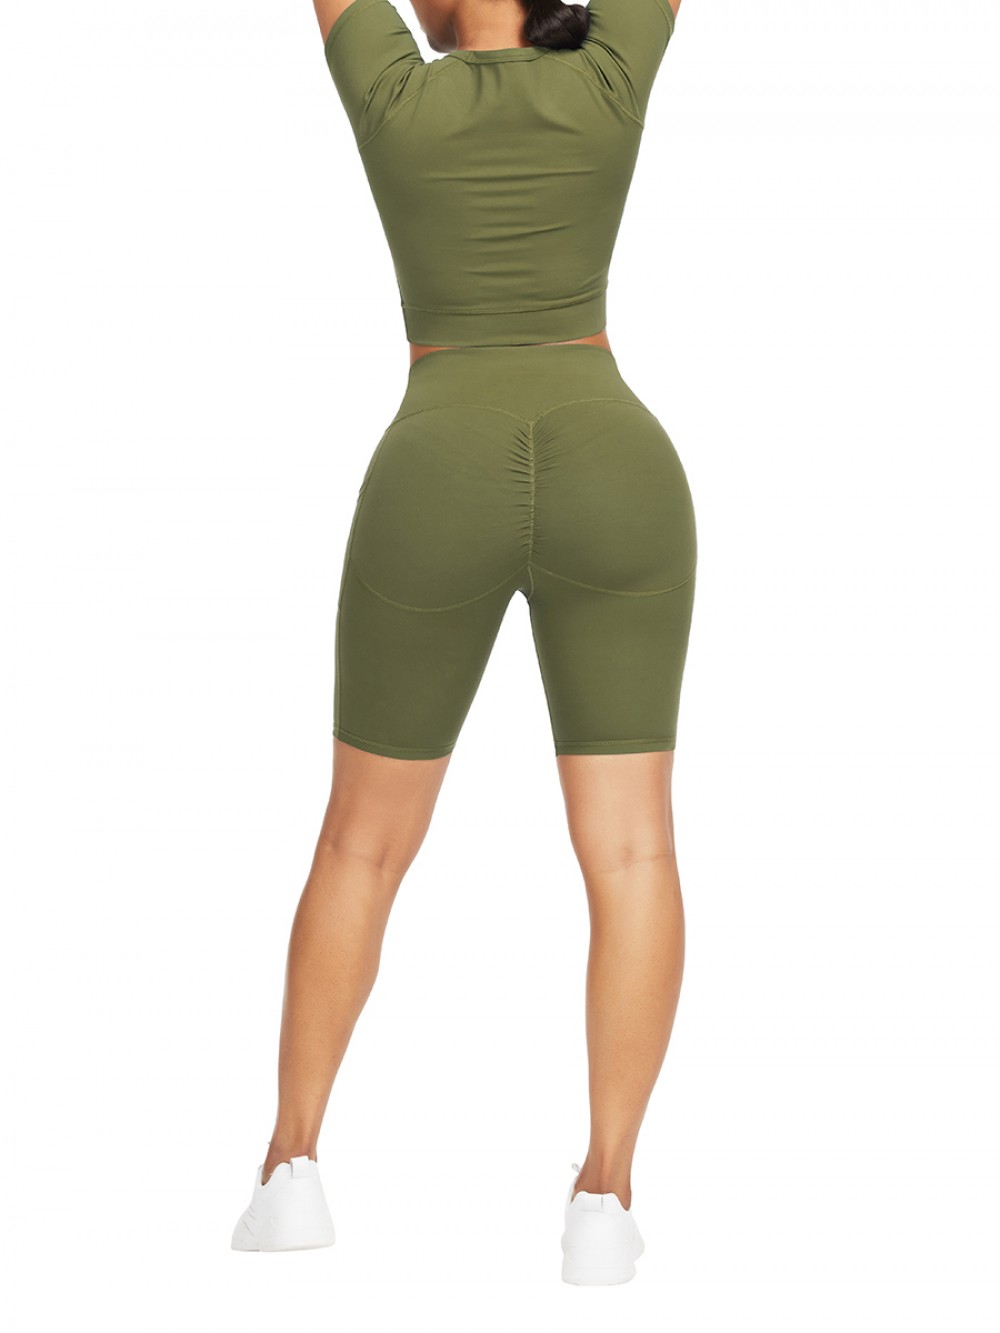 Fetching Army Green Crew Neck Top Wide Waistband Shorts For Workout